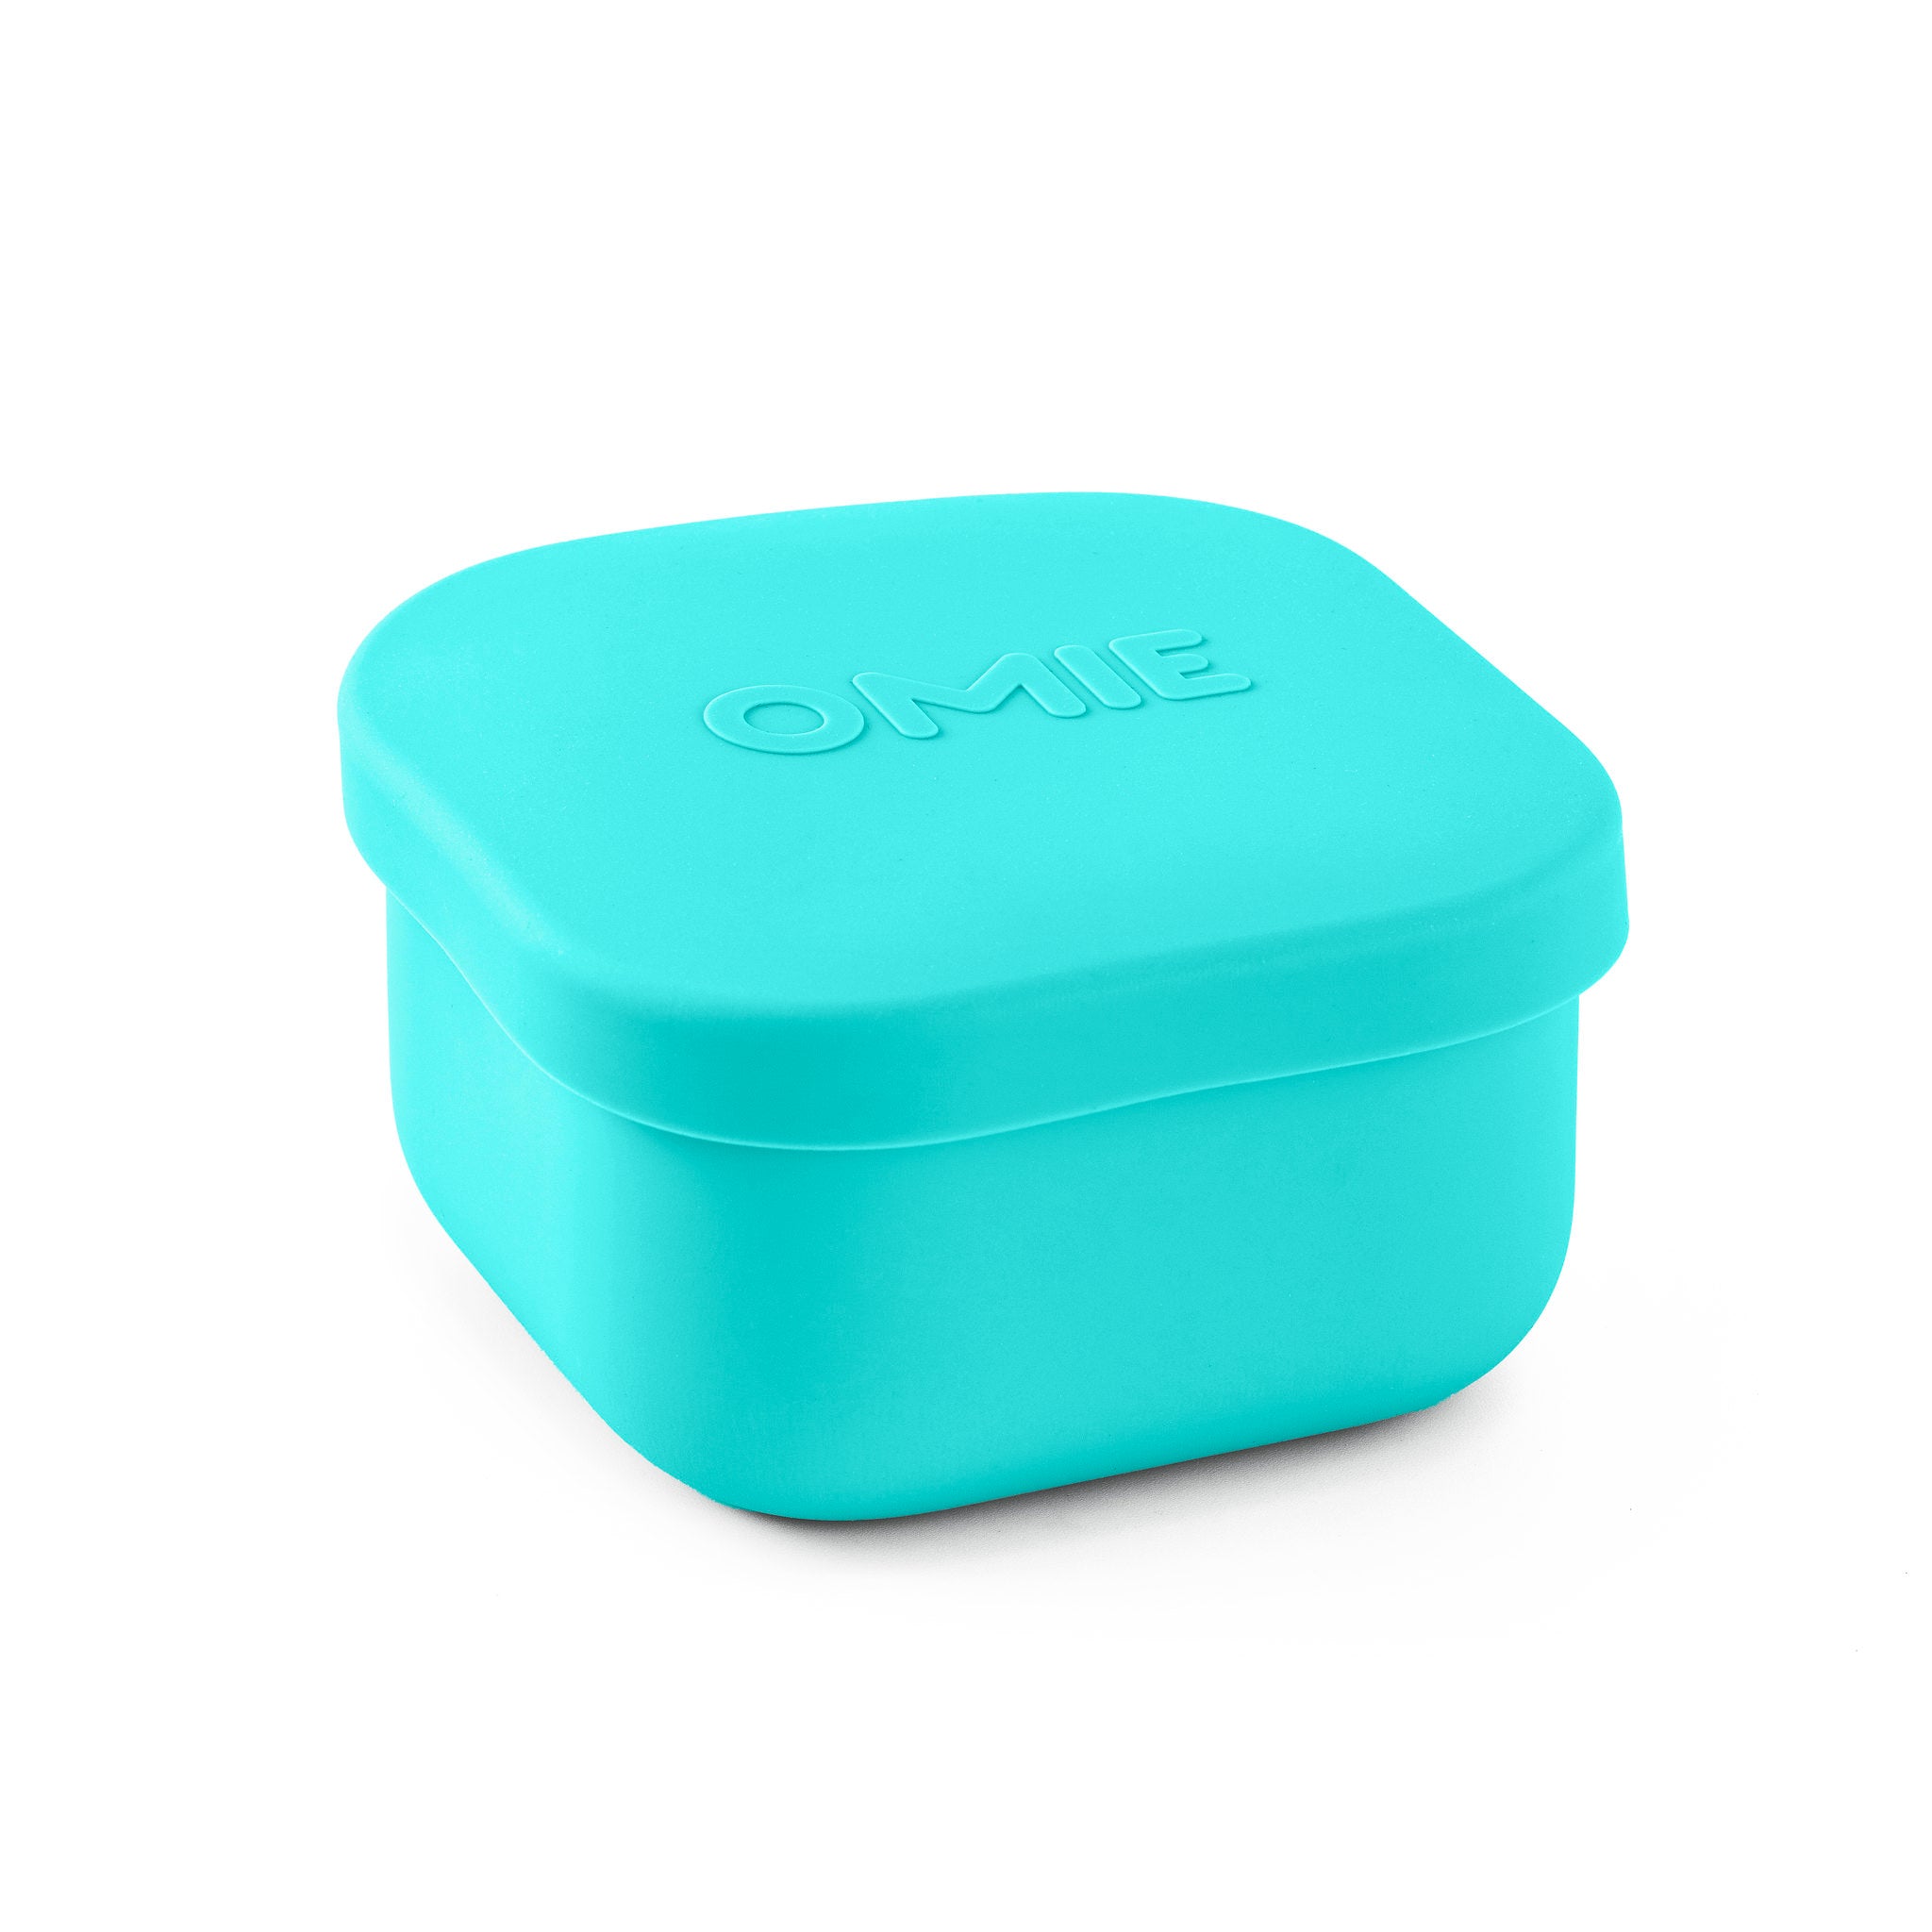 OmieSnack Silicone Food Storage Container 9.4 oz for OmieBox